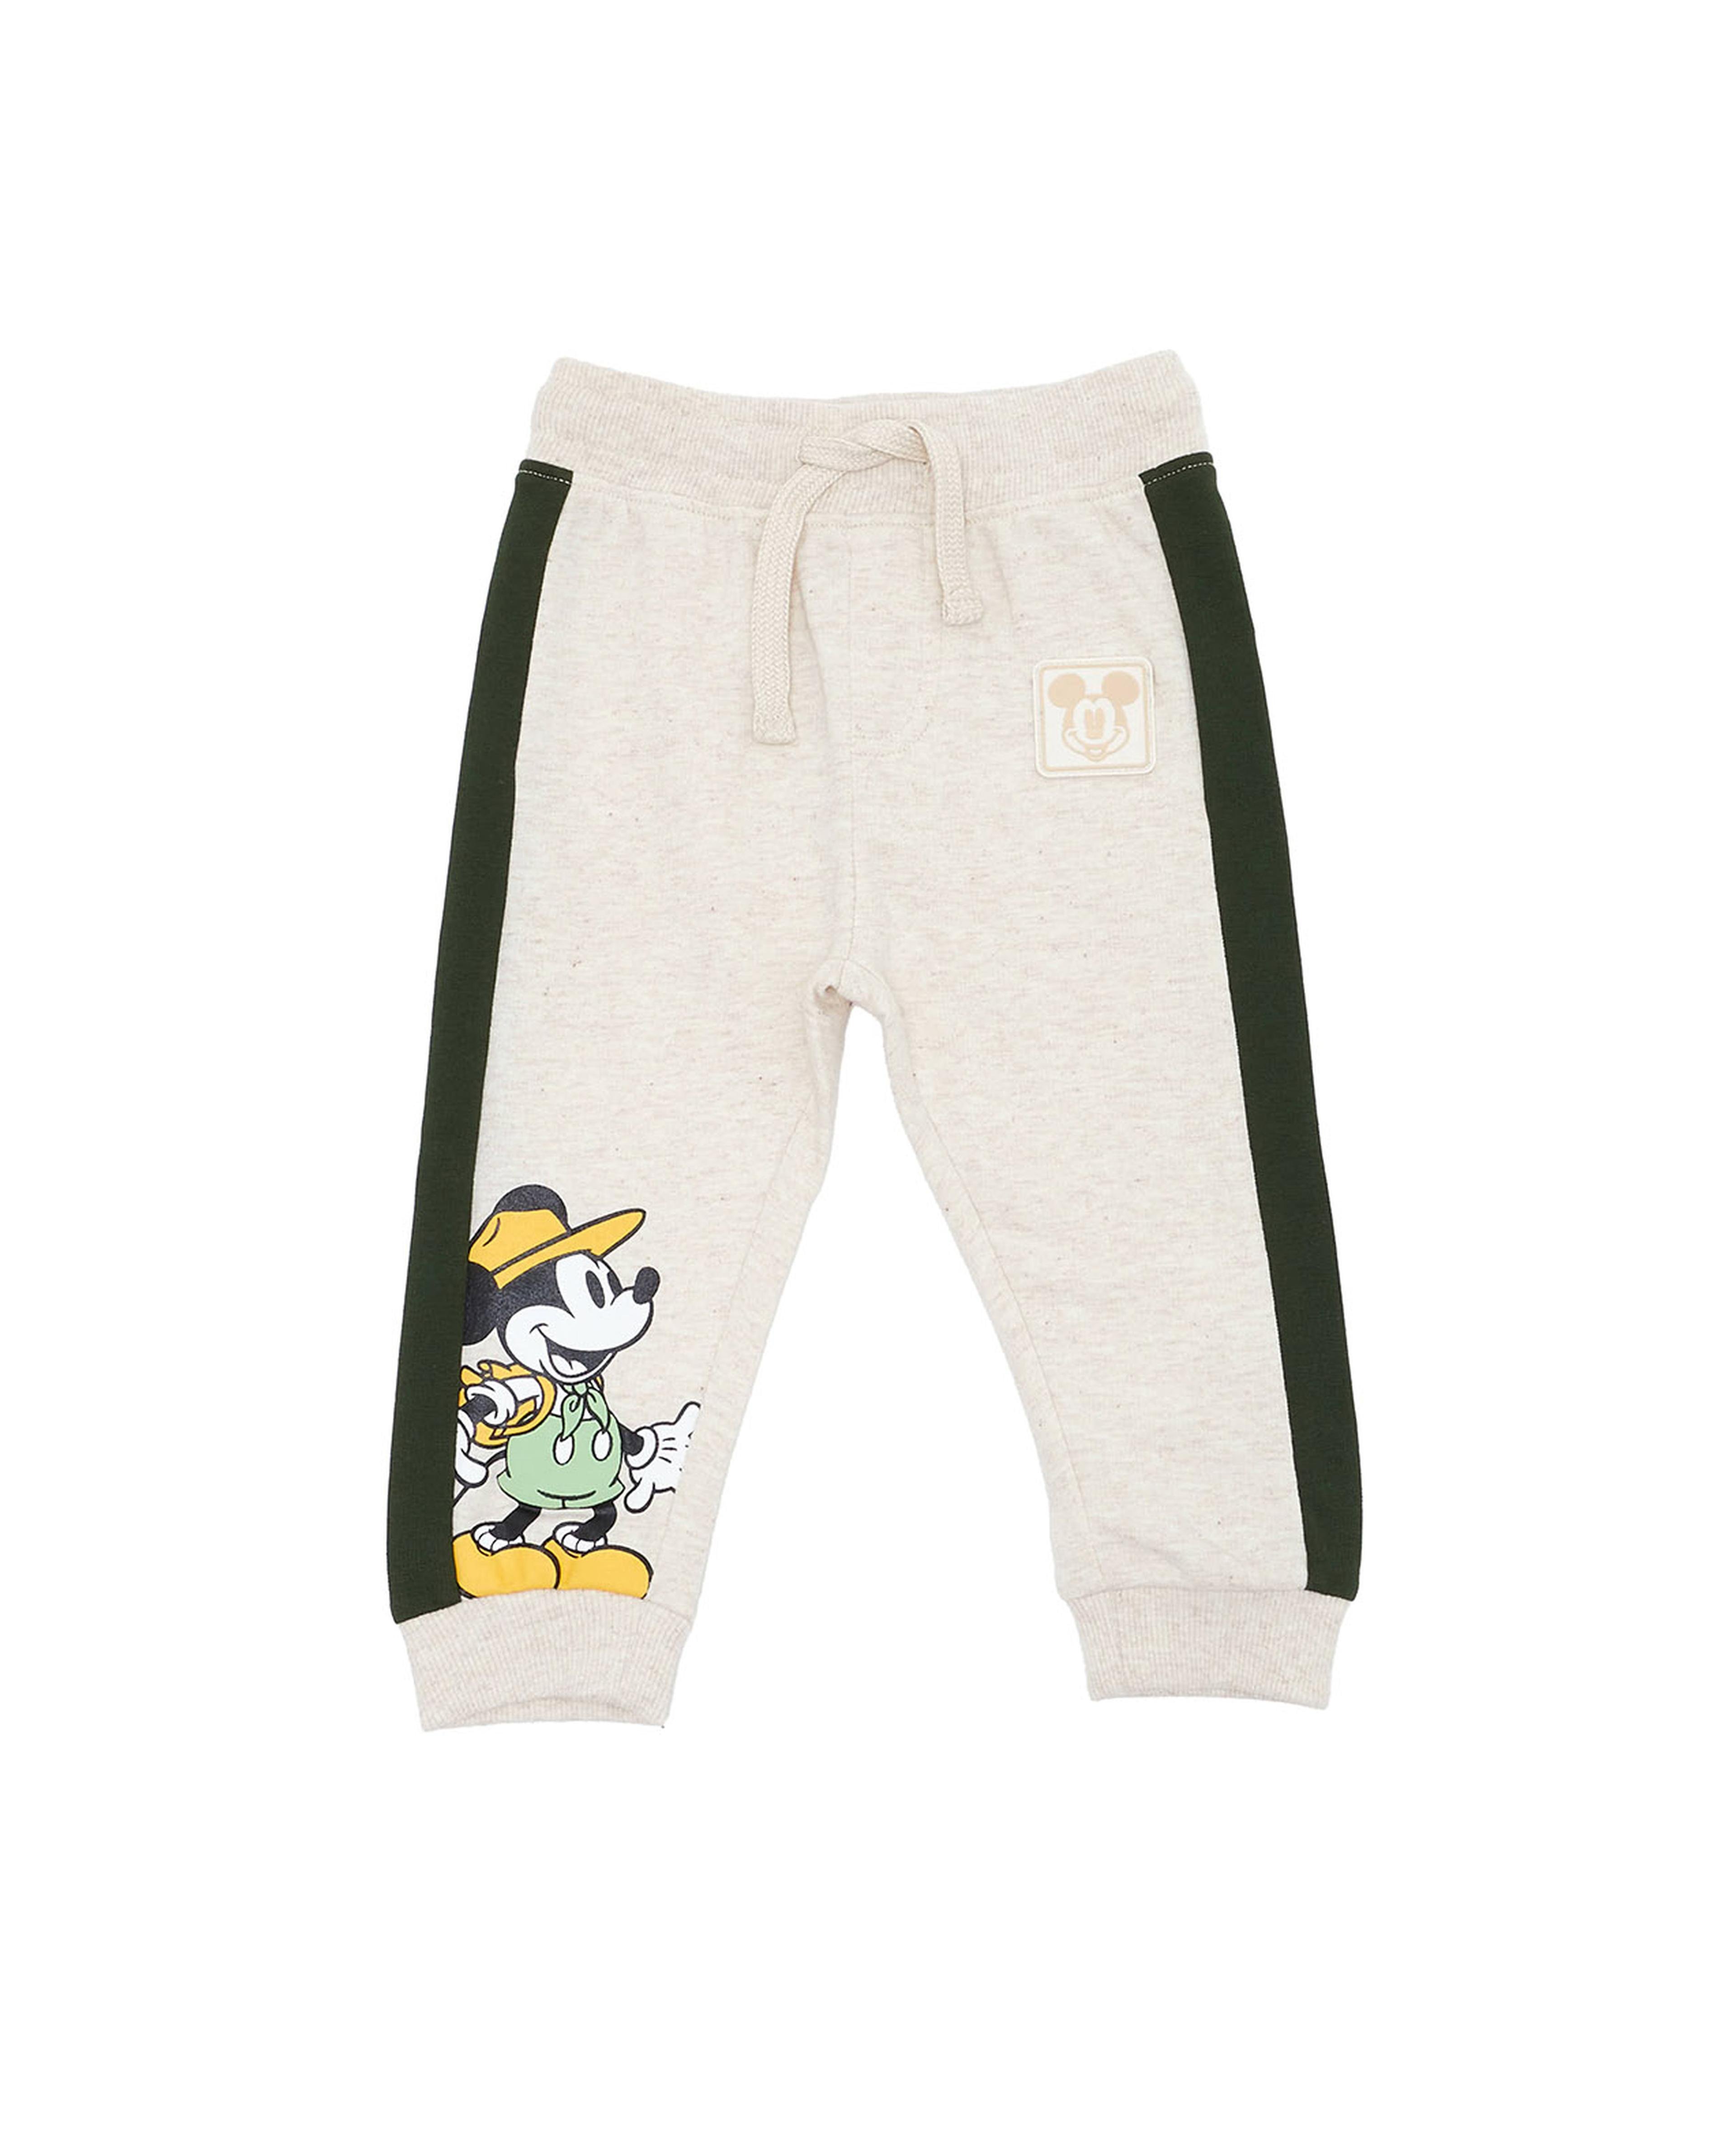 Mickey Mouse Print Clothing Set